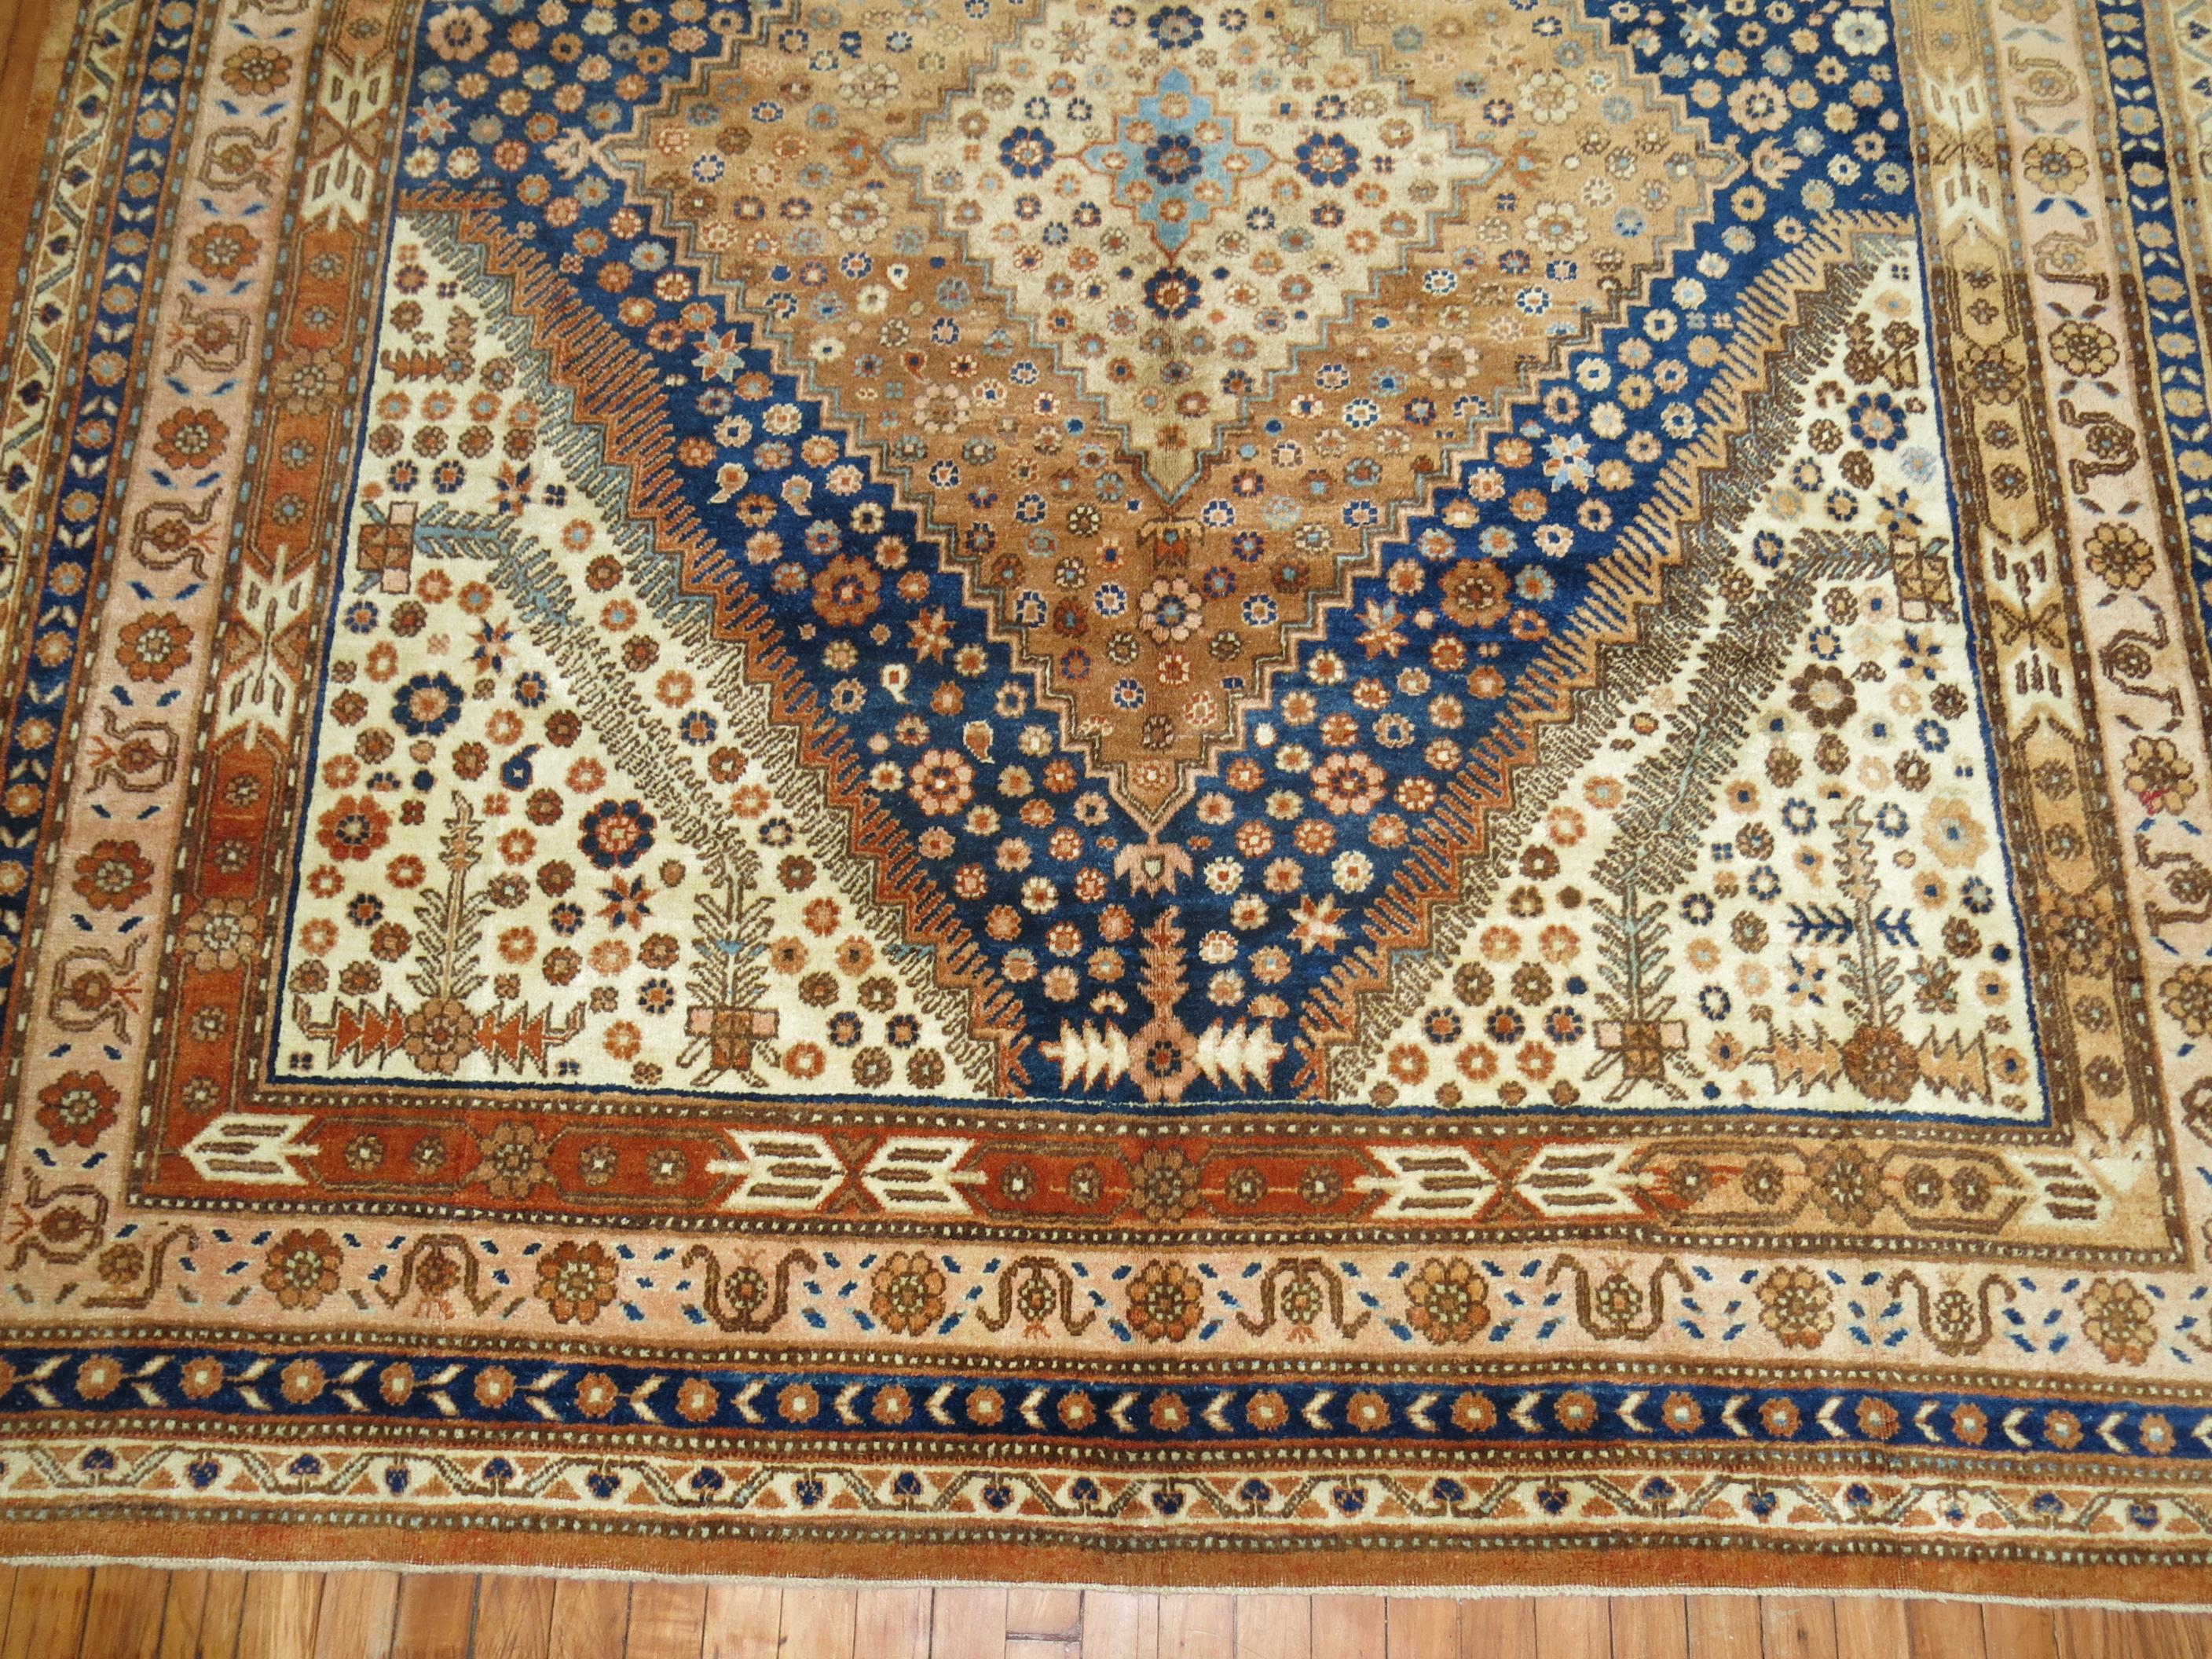 Large Gallery Size Khotan rug from the middle of the century with a geometric design in deep blue, burnt orange, and apricot accents

Measures: 7'2'' x 14'